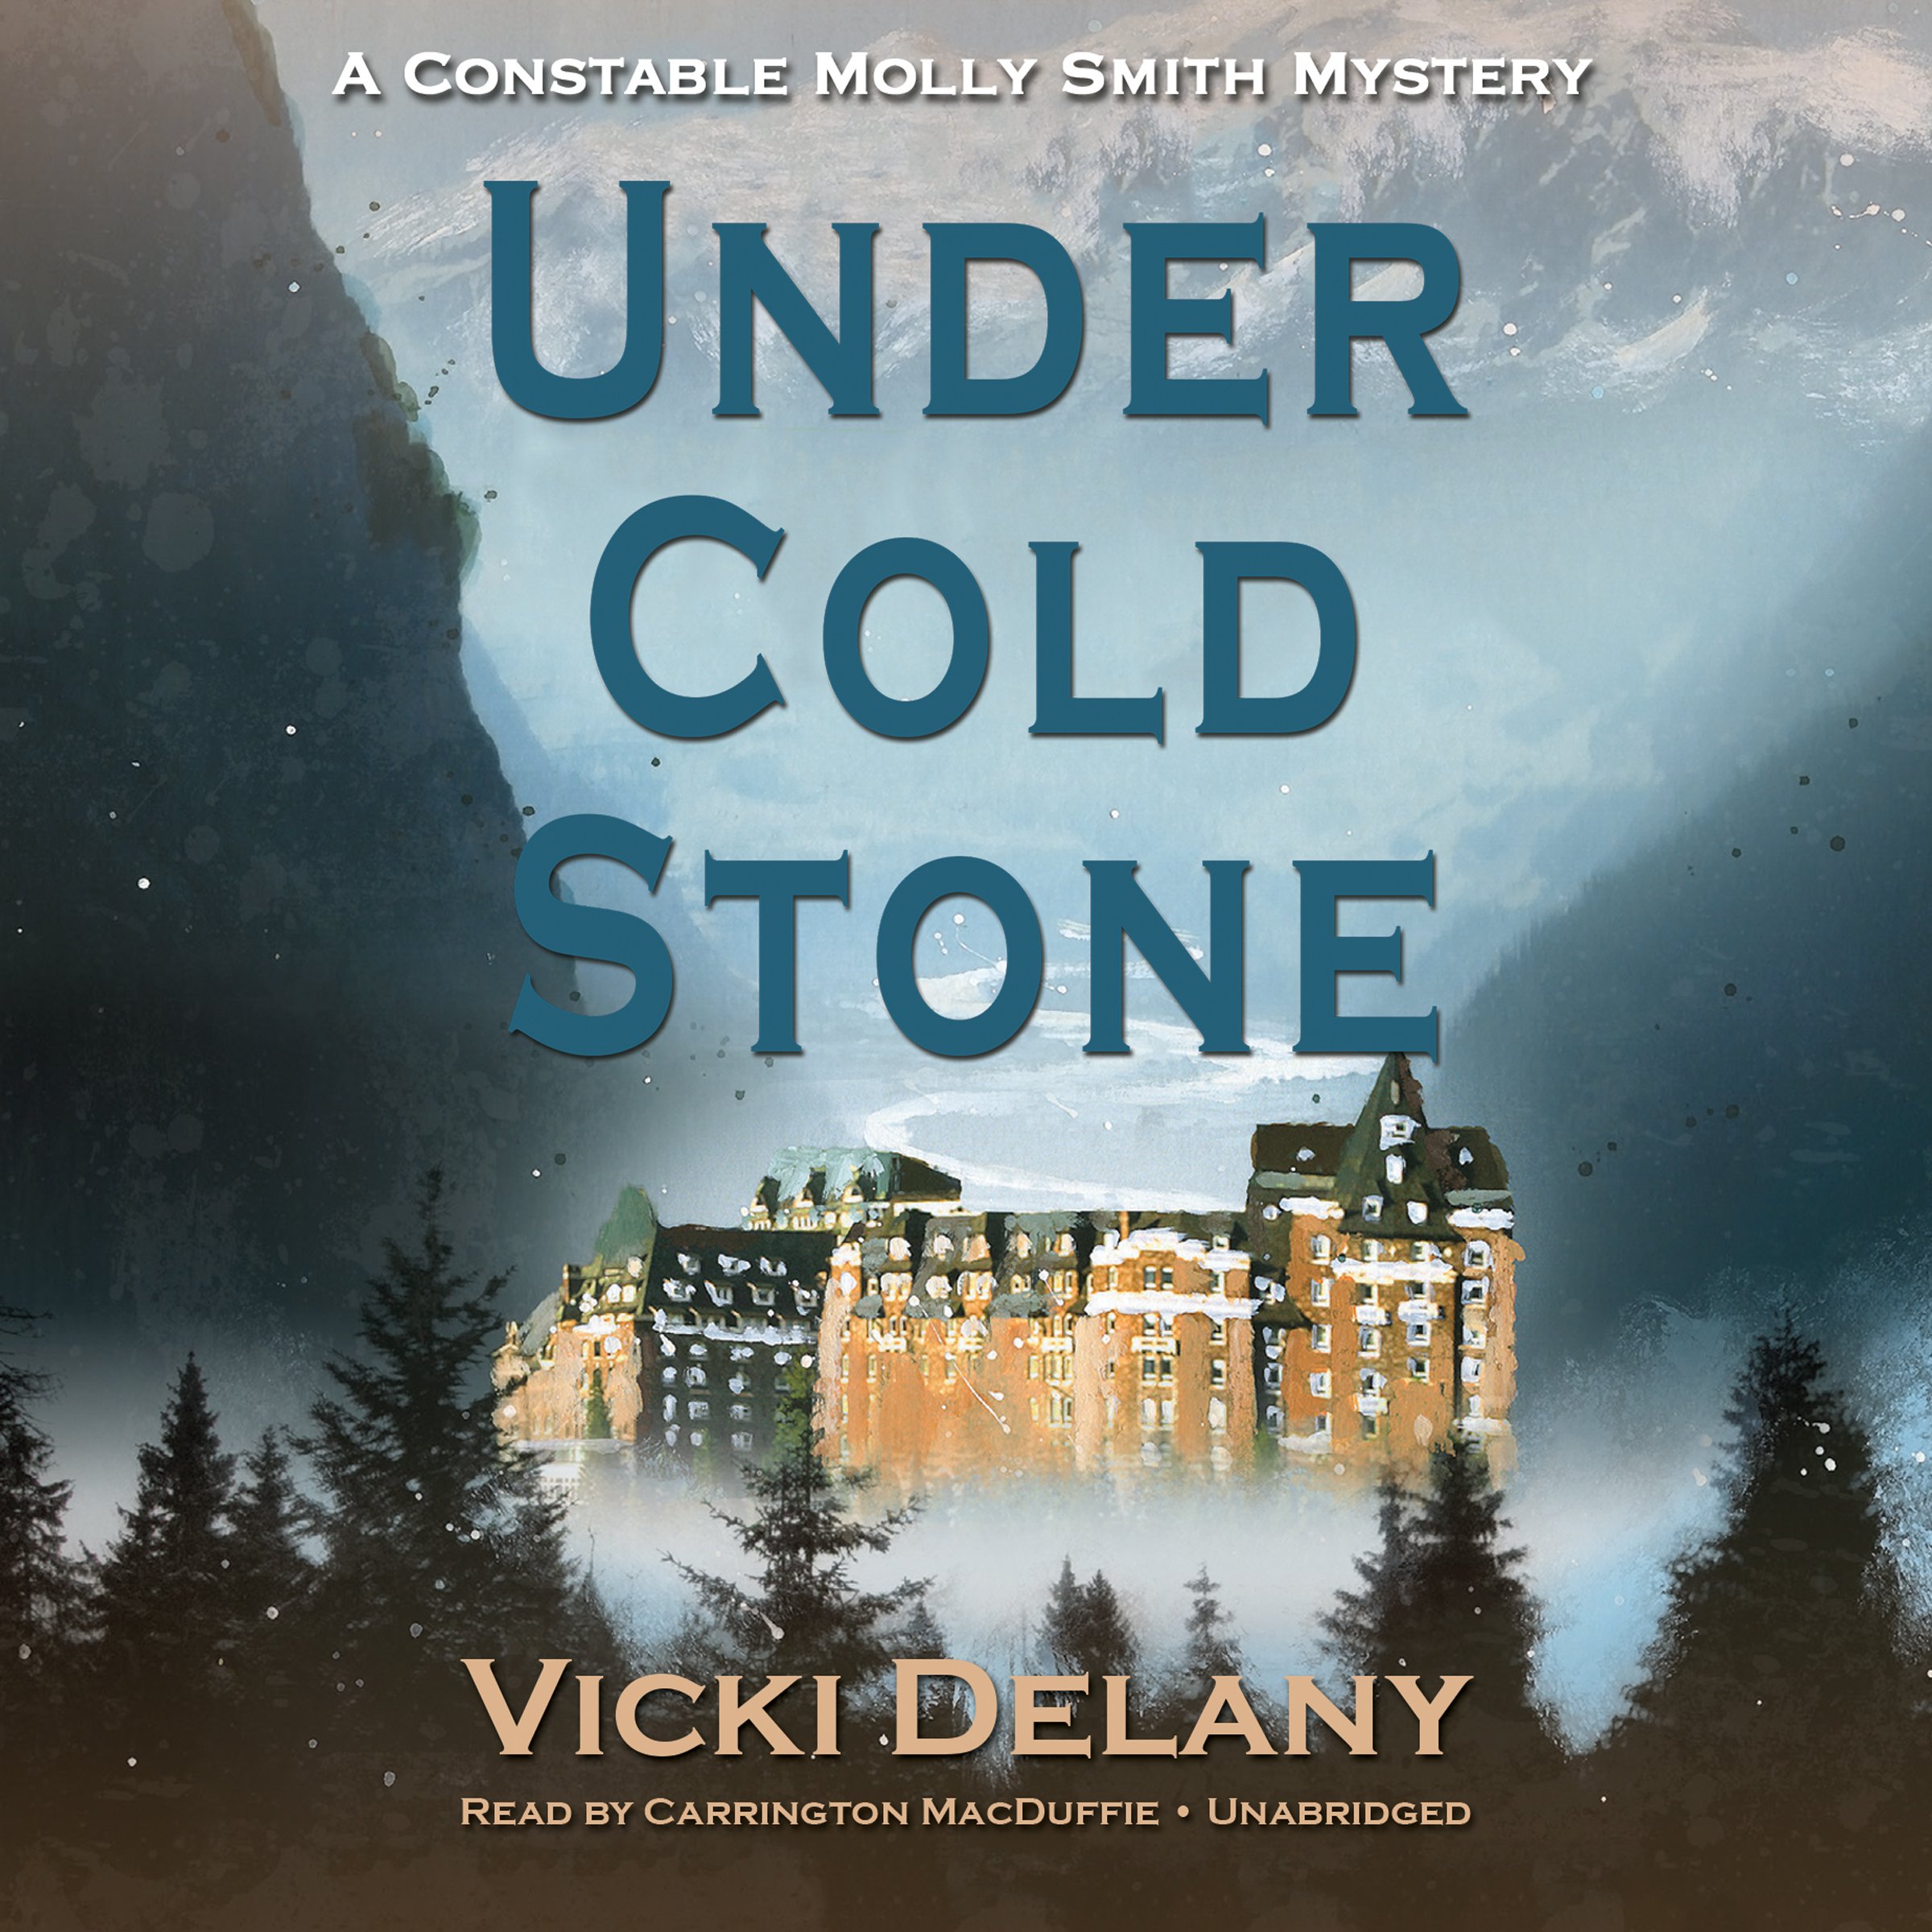 Under Cold Stone: A Constable Molly Smith Mystery